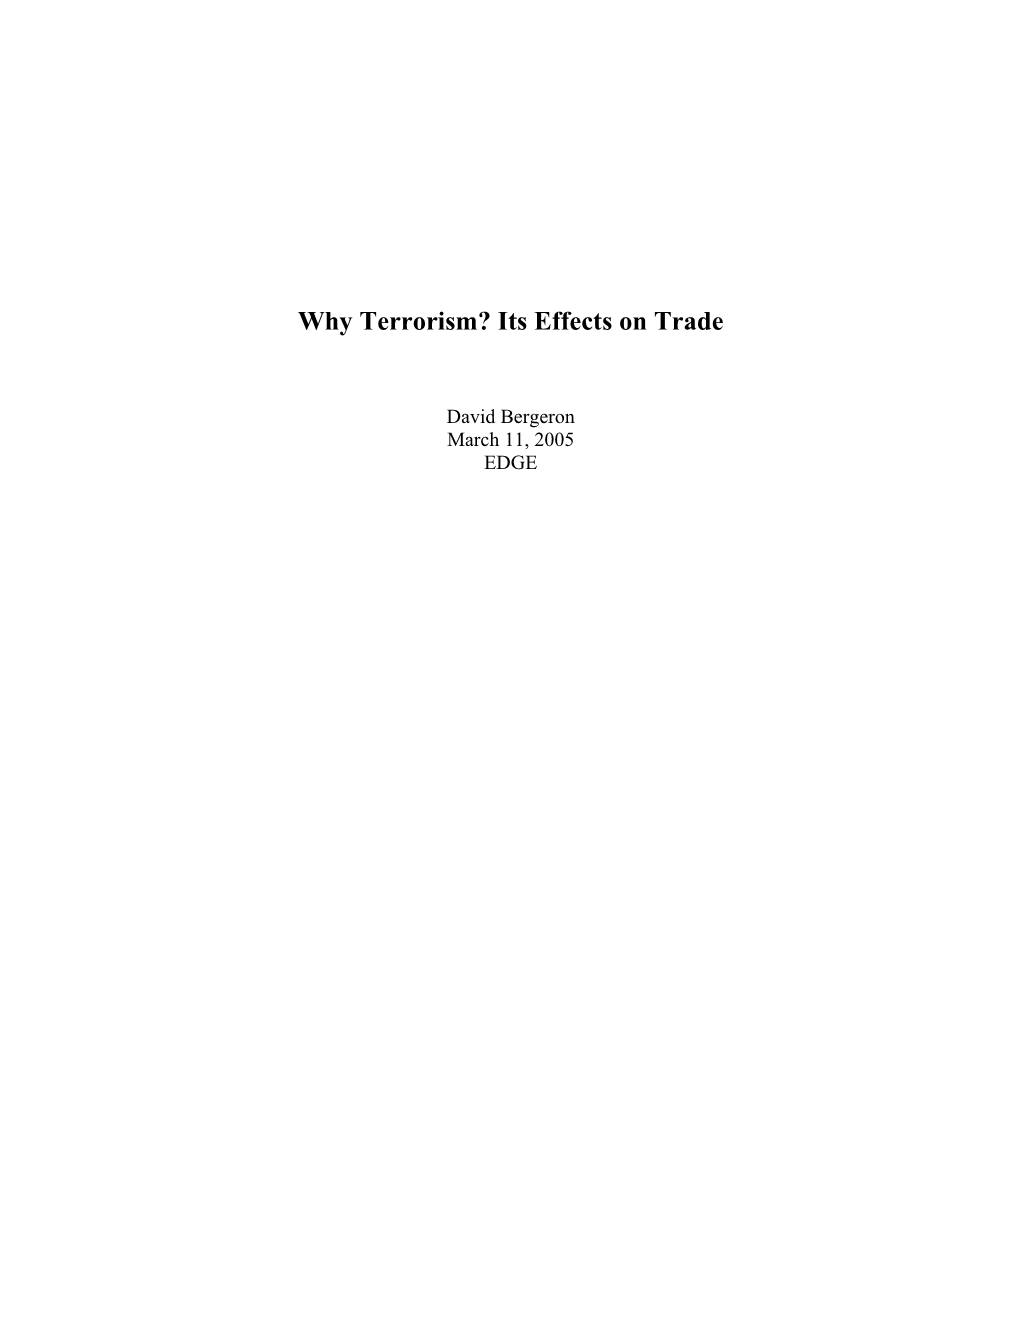 Why Terrorism? Its Effects on Trade